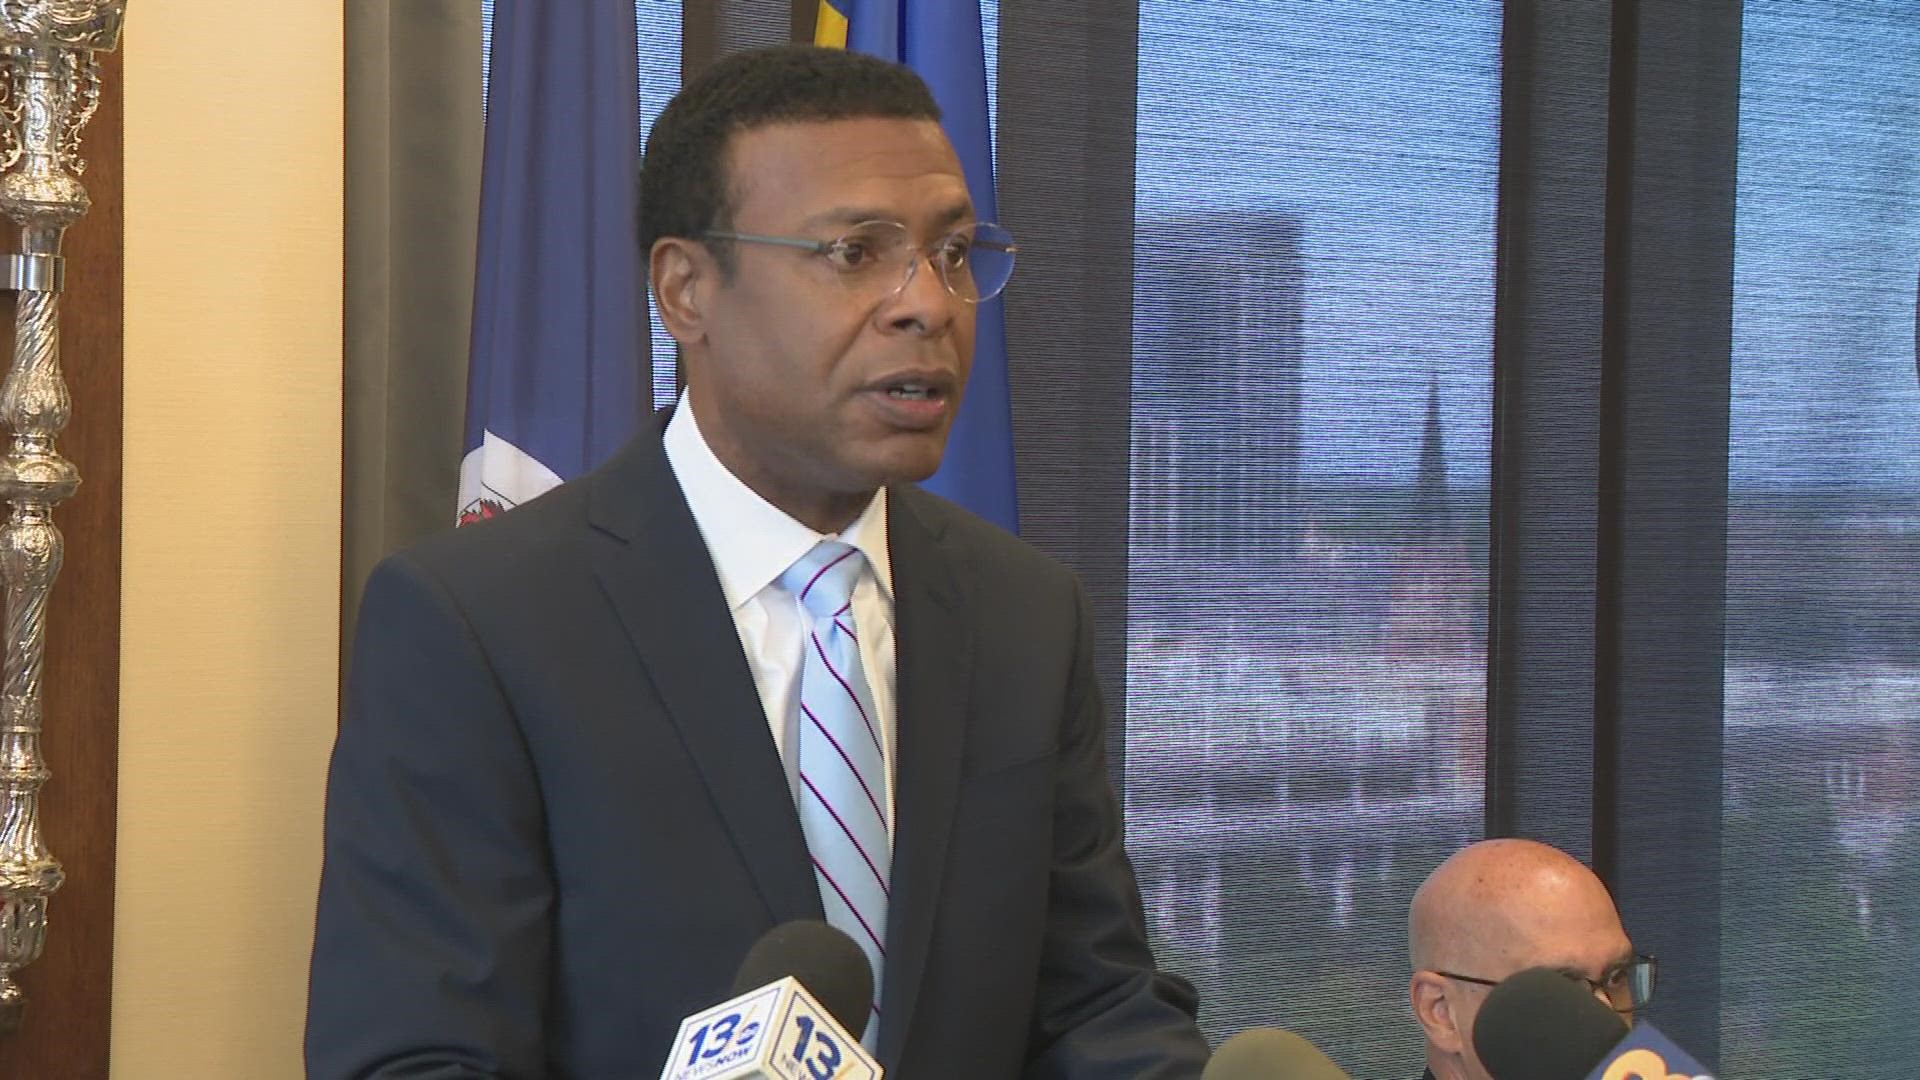 Norfolk Mayor Kenneth Cooper Alexander, interim Police Chief Mike Goldsmith and Sheriff Joe Baron gave an update on the overnight shootings across the city.